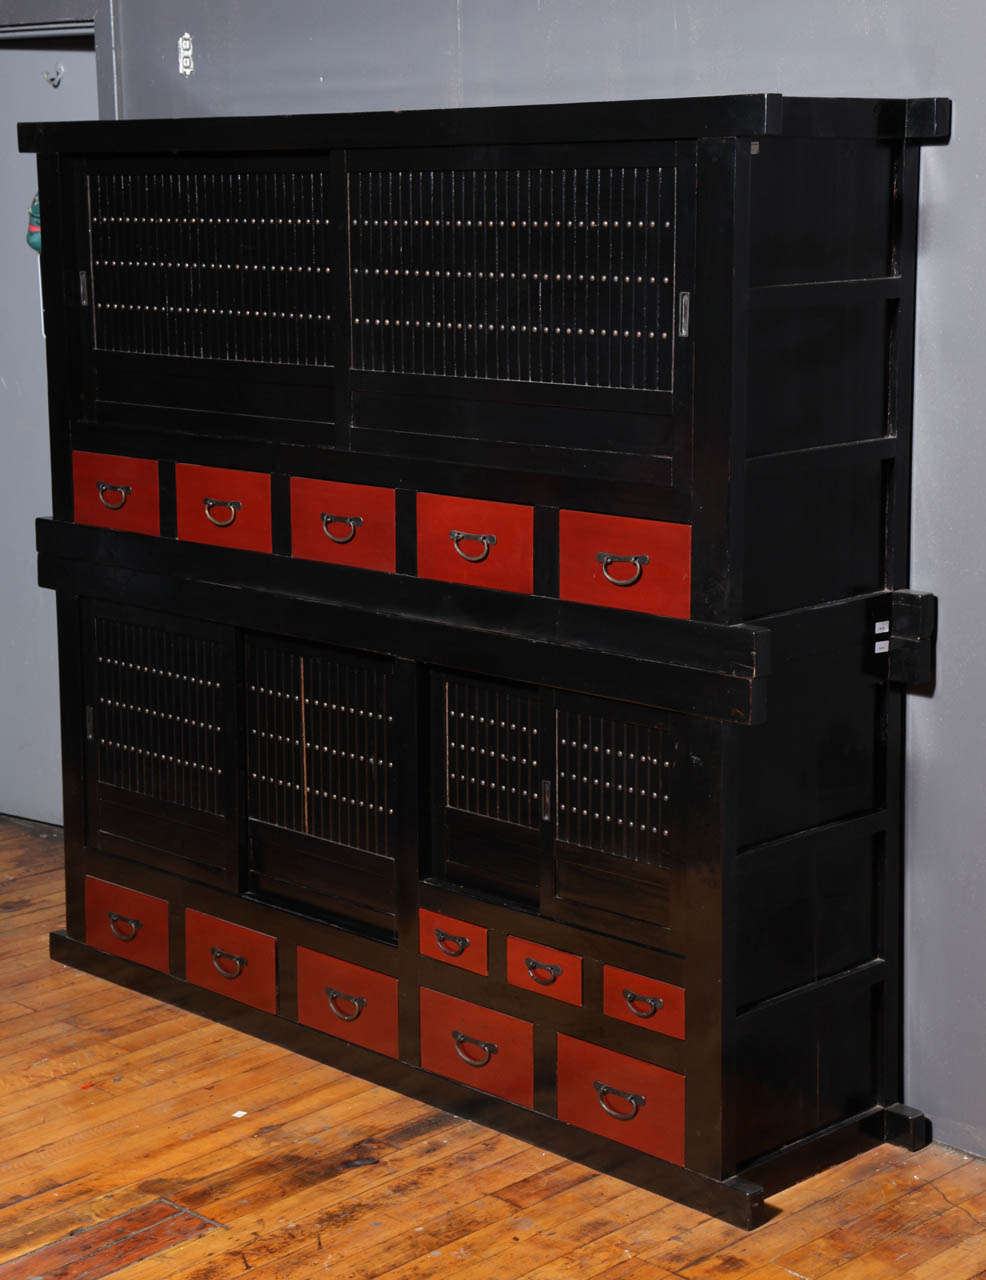 Black & Red stacking Japanese style pantry Cabinet.
-13 Drawers
-Can be Side by Side or stacked